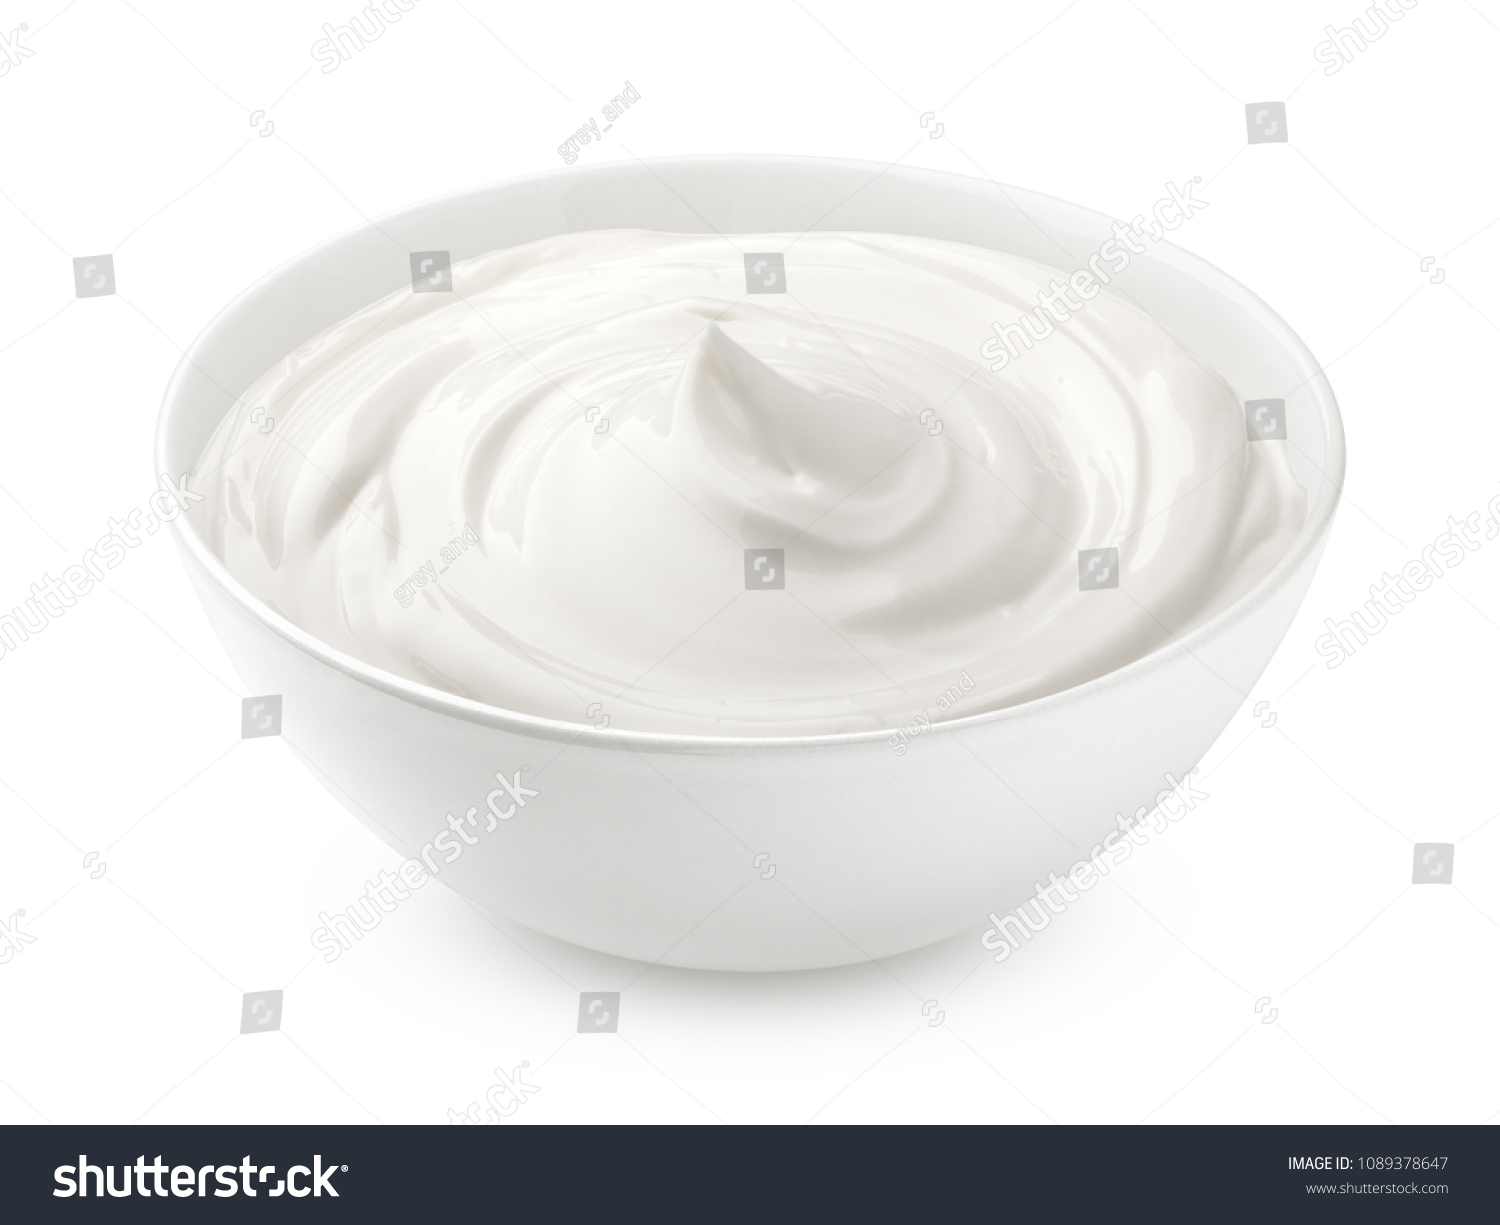 sour cream in glass, mayonnaise, yogurt, isolated on white background, clipping path, full depth of field #1089378647